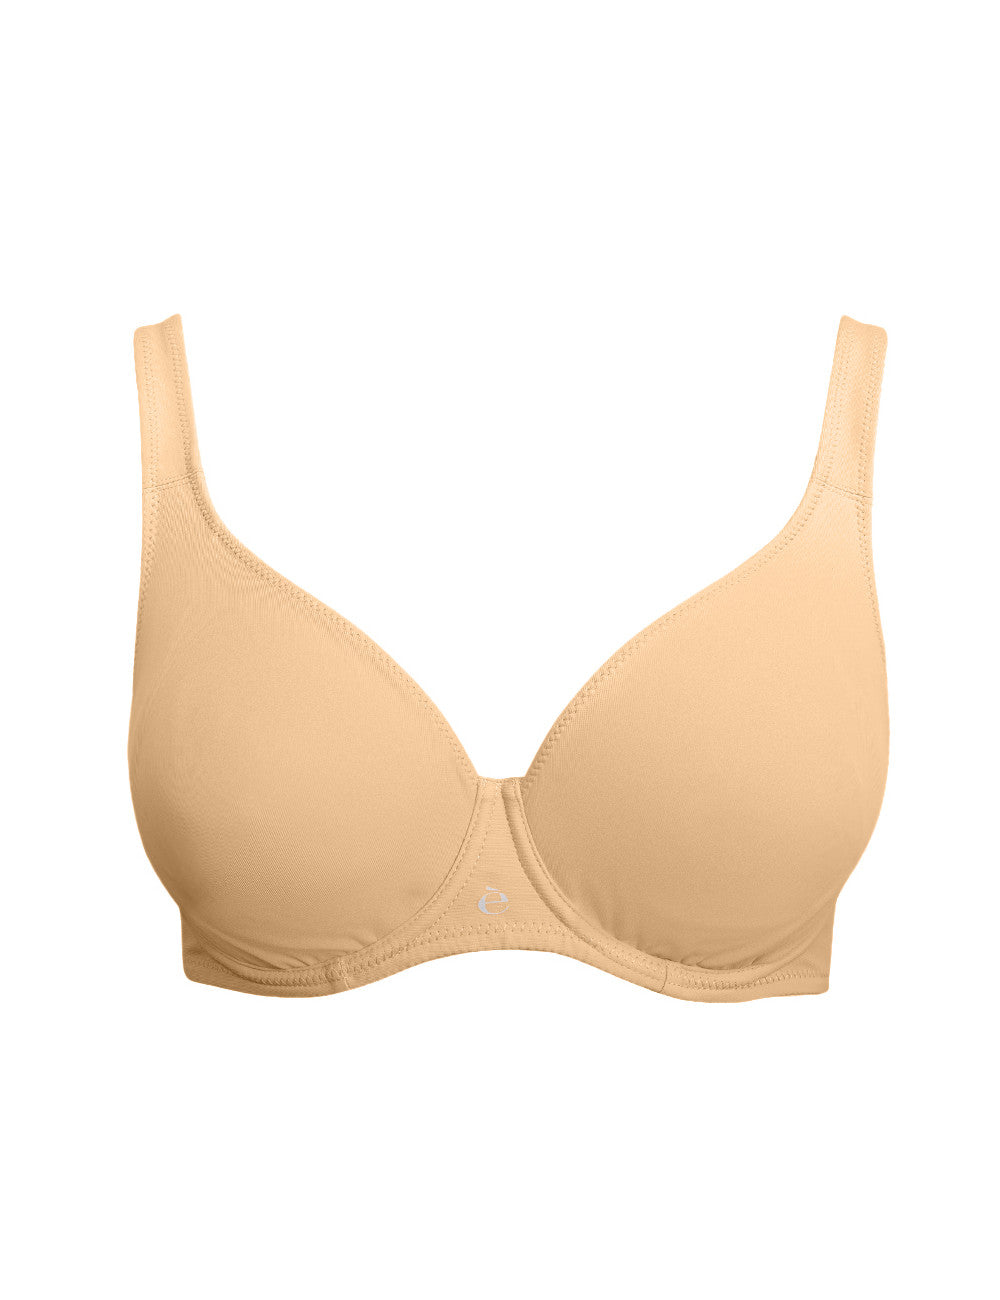 Collection Lulù - Unwired light padded cup bra - Leilieve - Women Underwear  Made in Italy since 1961